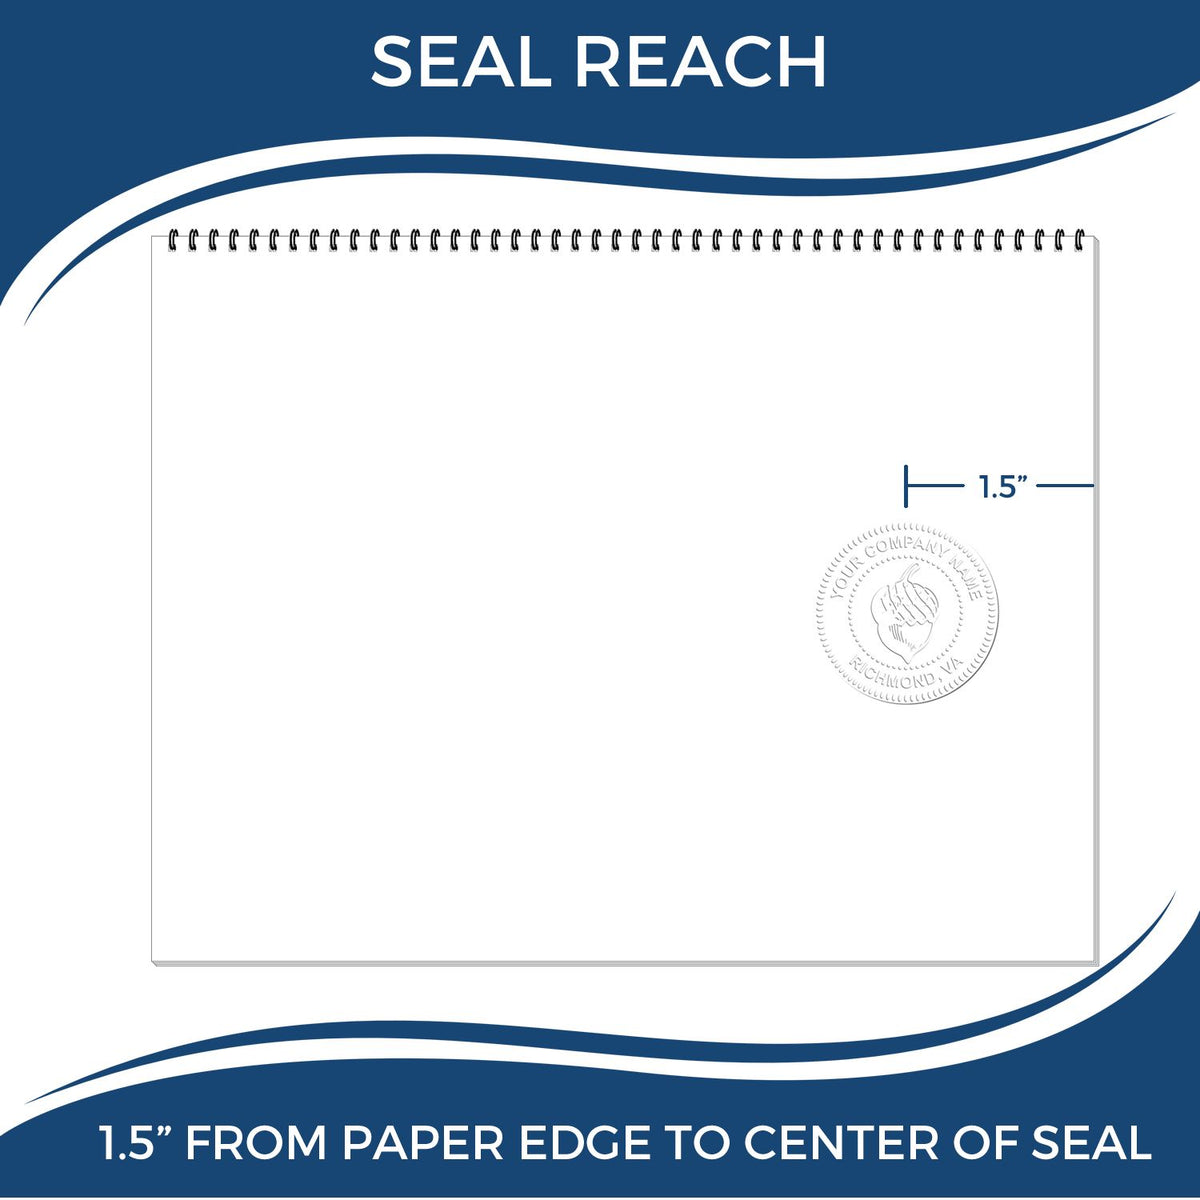 An infographic showing the seal reach which is represented by a ruler and a miniature seal image of the Gift Florida Architect Seal